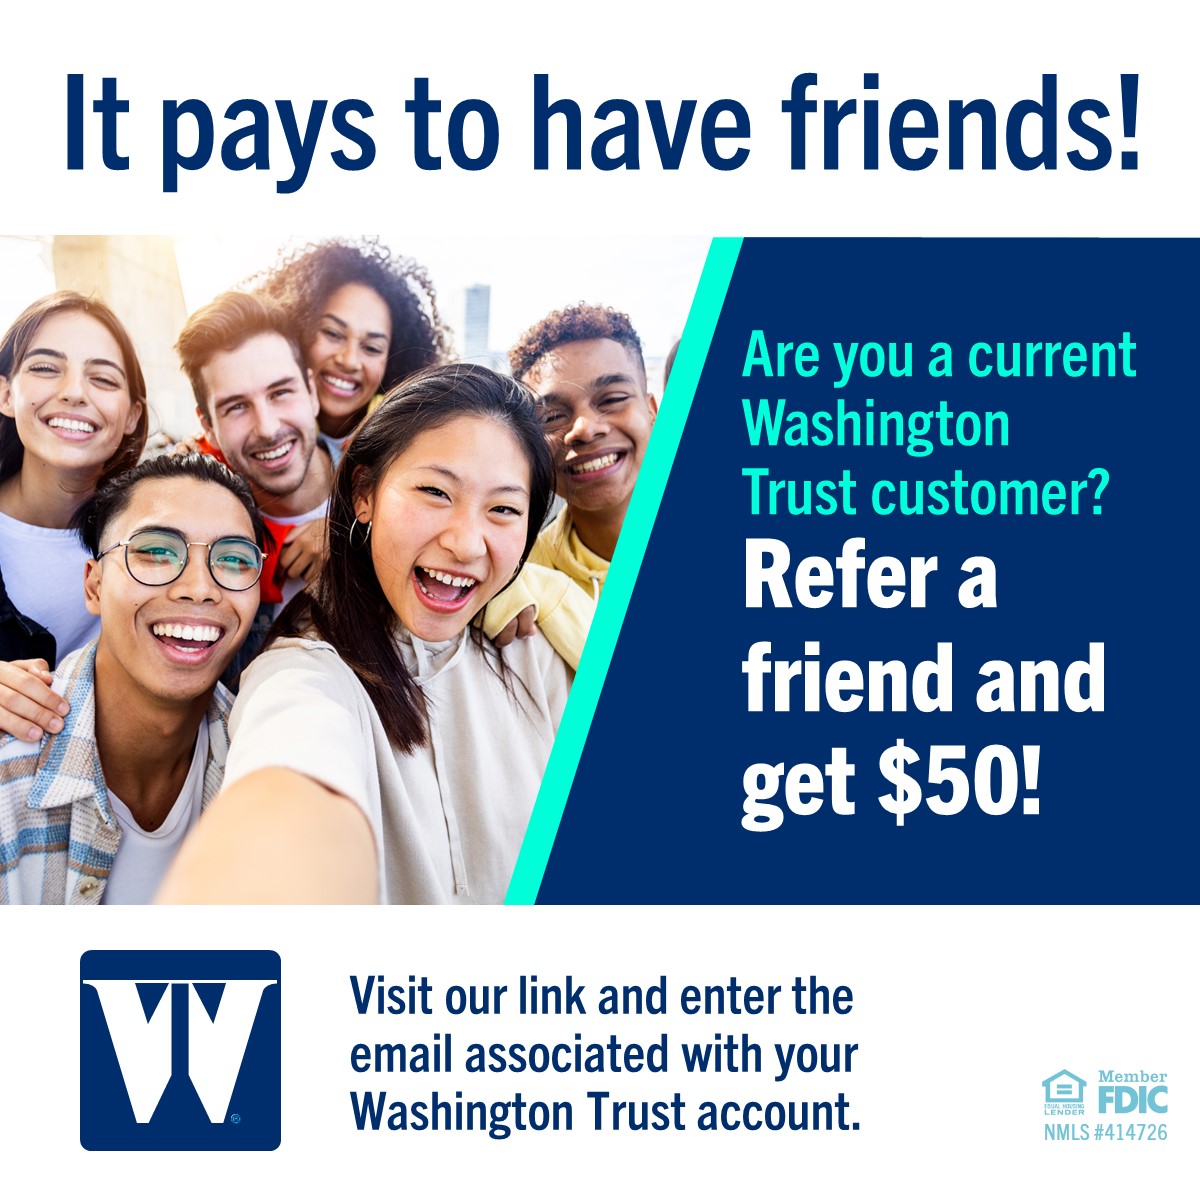 Washington Trust customers, visit: ▶️ ow.ly/IvEM50RxAhS The more you refer the more you can earn - it pays to have friends! _______________ What we value is you.™ #WashTrust #Cha-ching #Referafriend